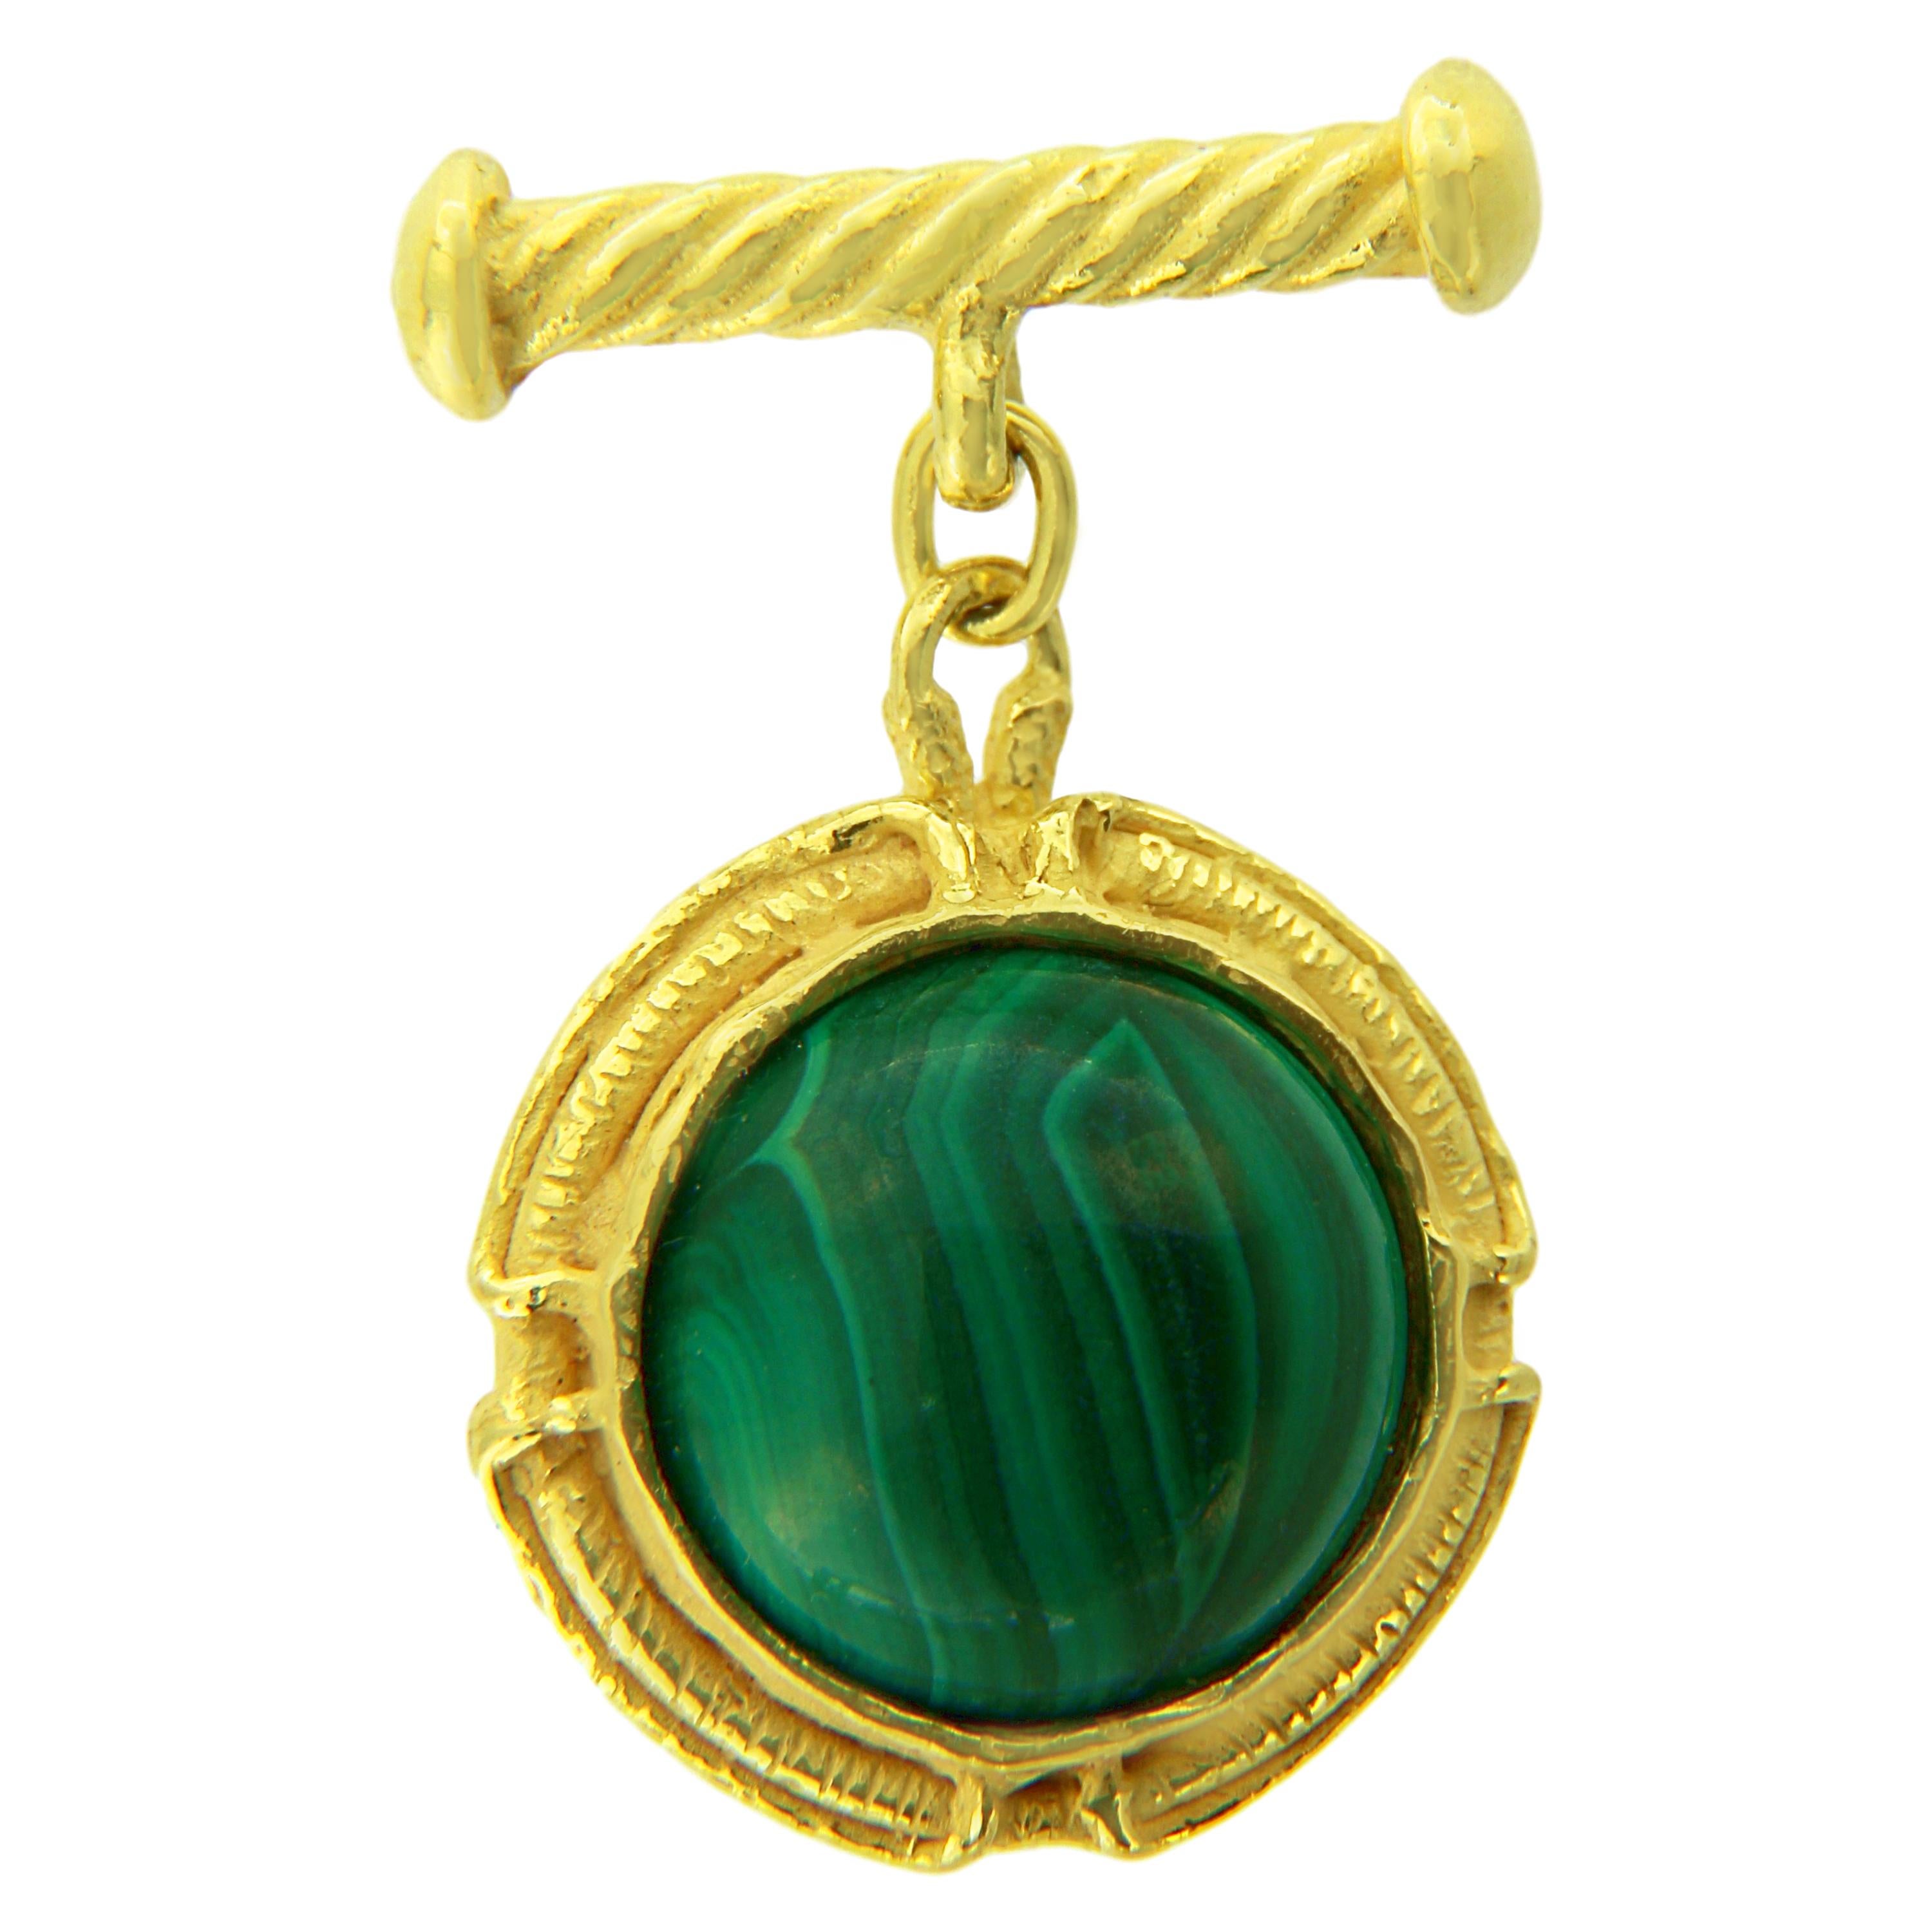 Green Malachite Gemstone Satin Yellow Gold Round Chain Cufflinks hand-crafted with lost-wax casting technique.

Lost-wax casting, one of the oldest techniques for creating jewellery, forms the basis of Sacchi's jewellery production. Modelling wax in